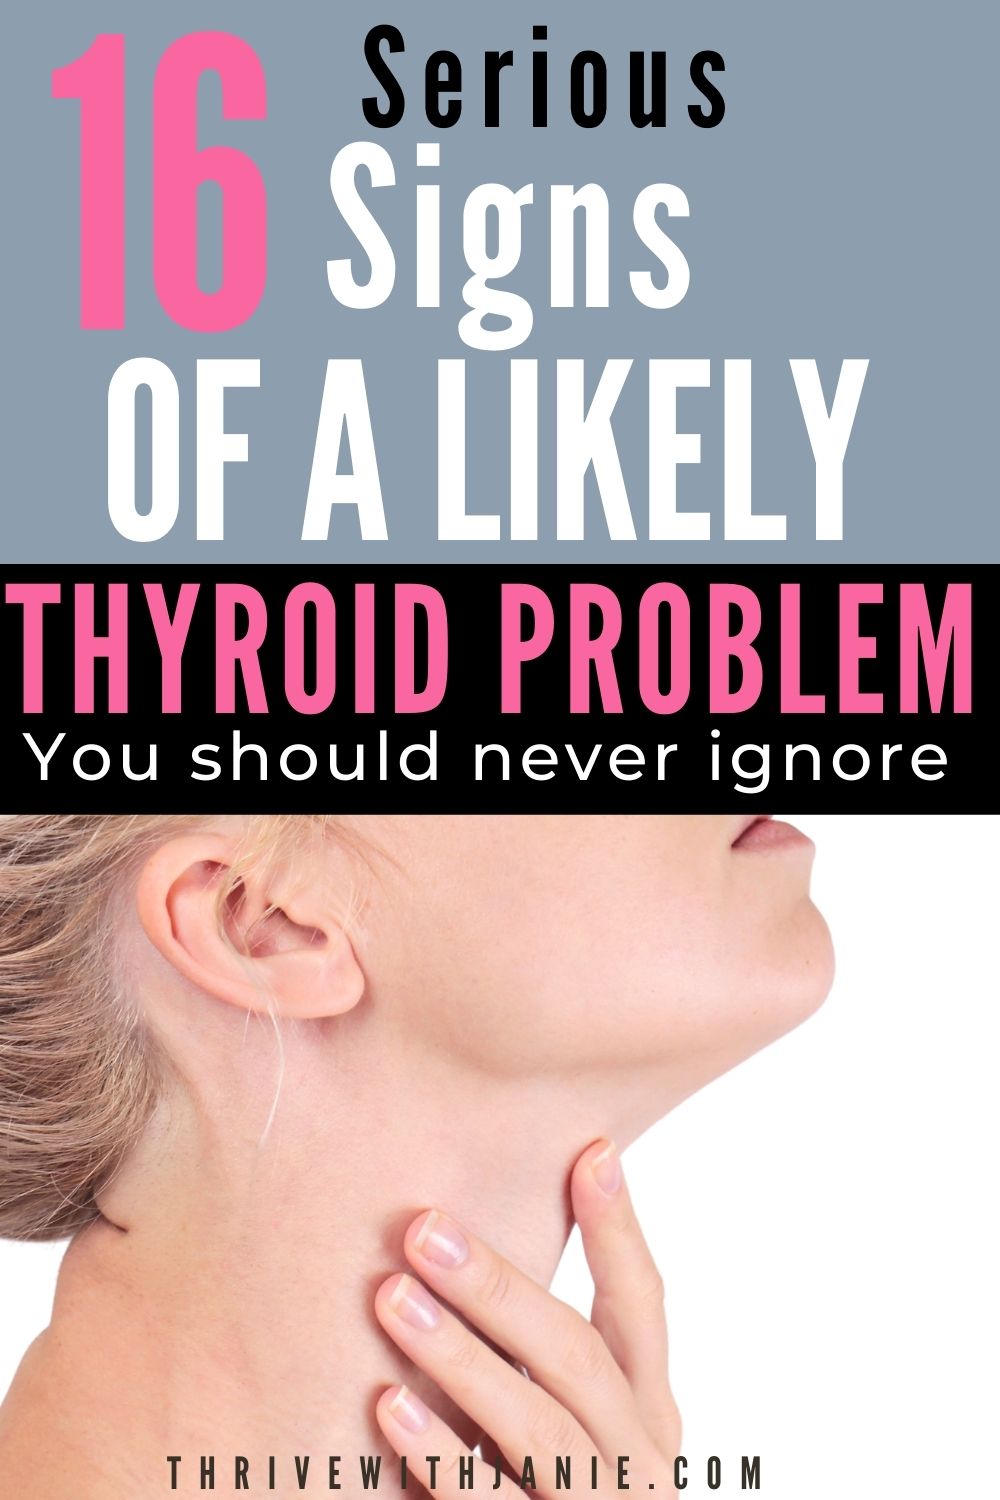 16 Signs of a thyroid hormonal imbalance you should never ignore - Thrive With Janie